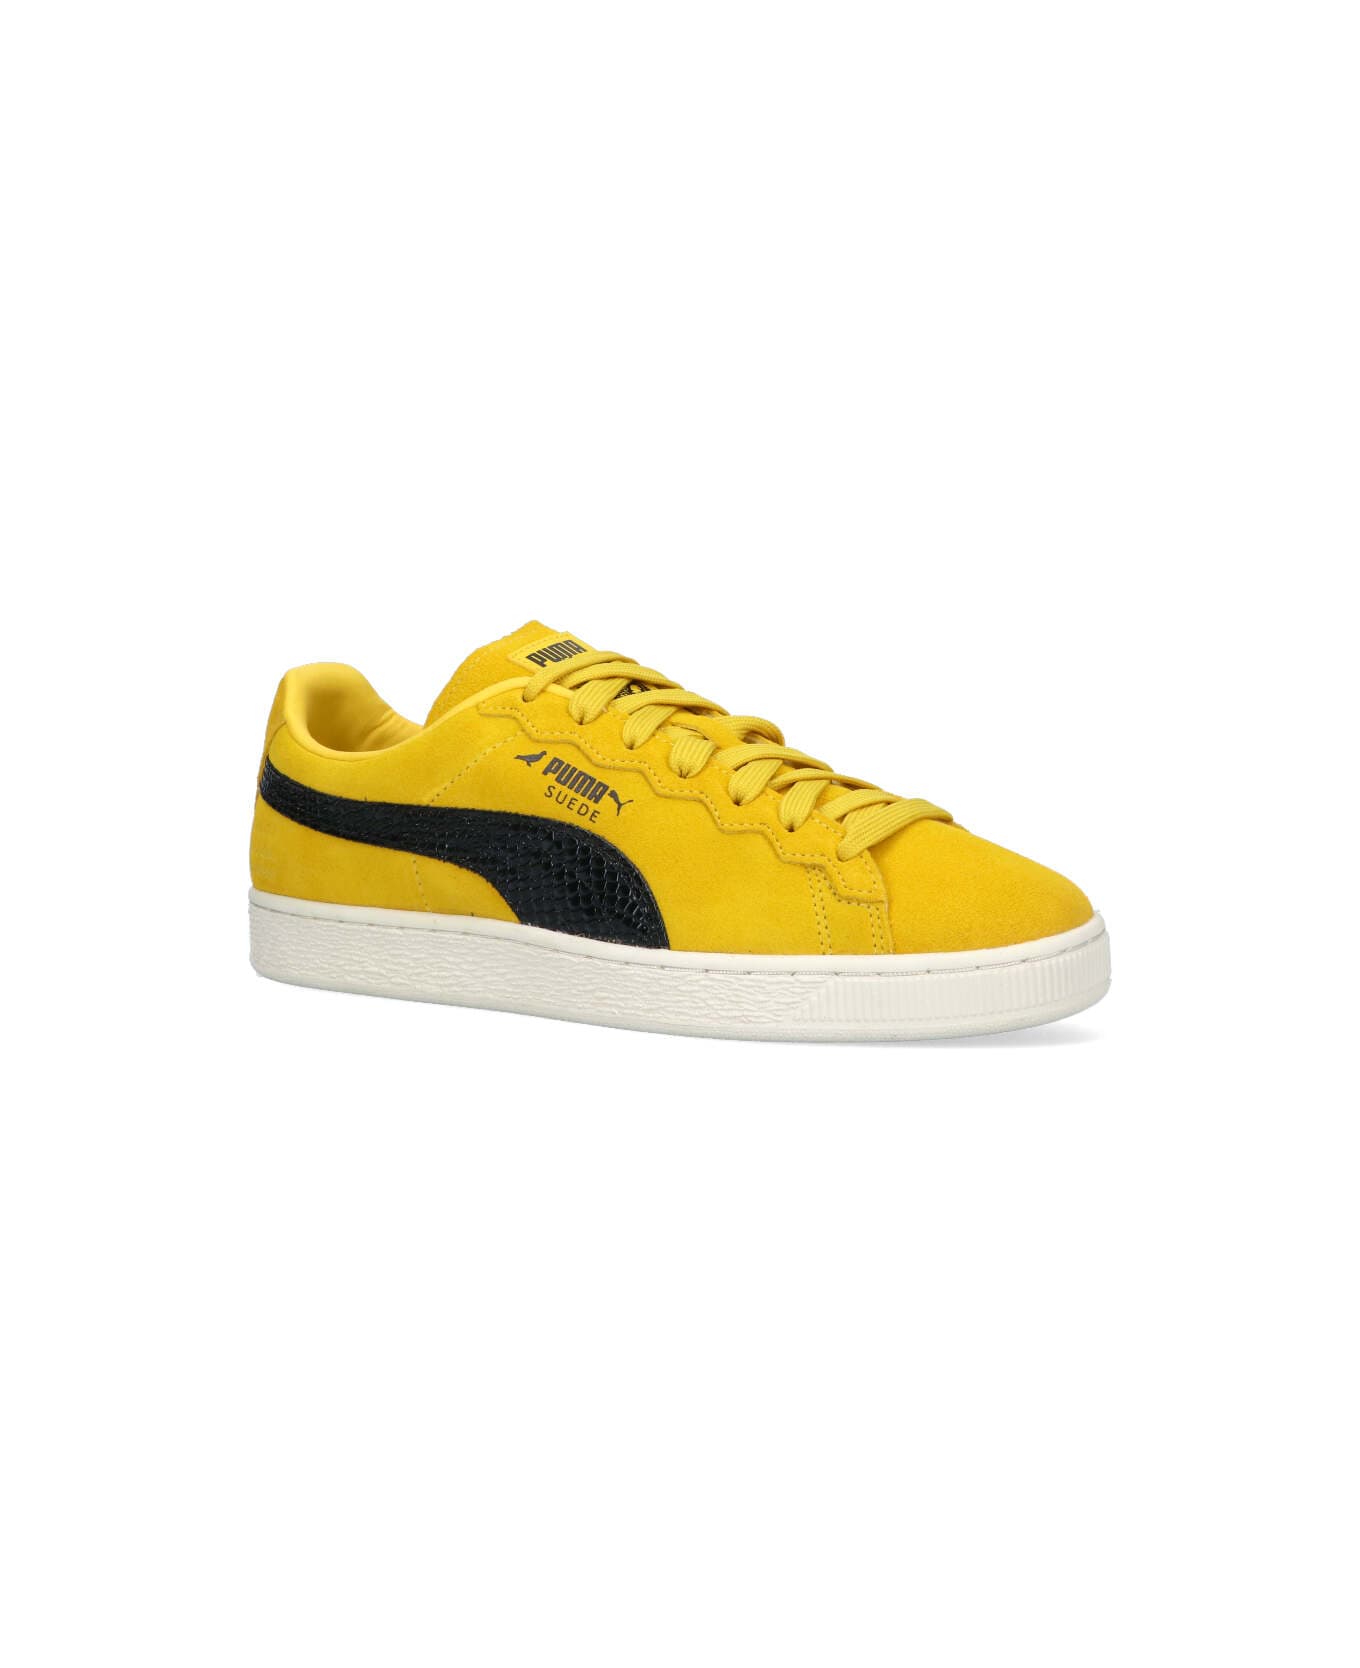 Puma X Staple Suede Low Sneakers - Yellow スニーカー